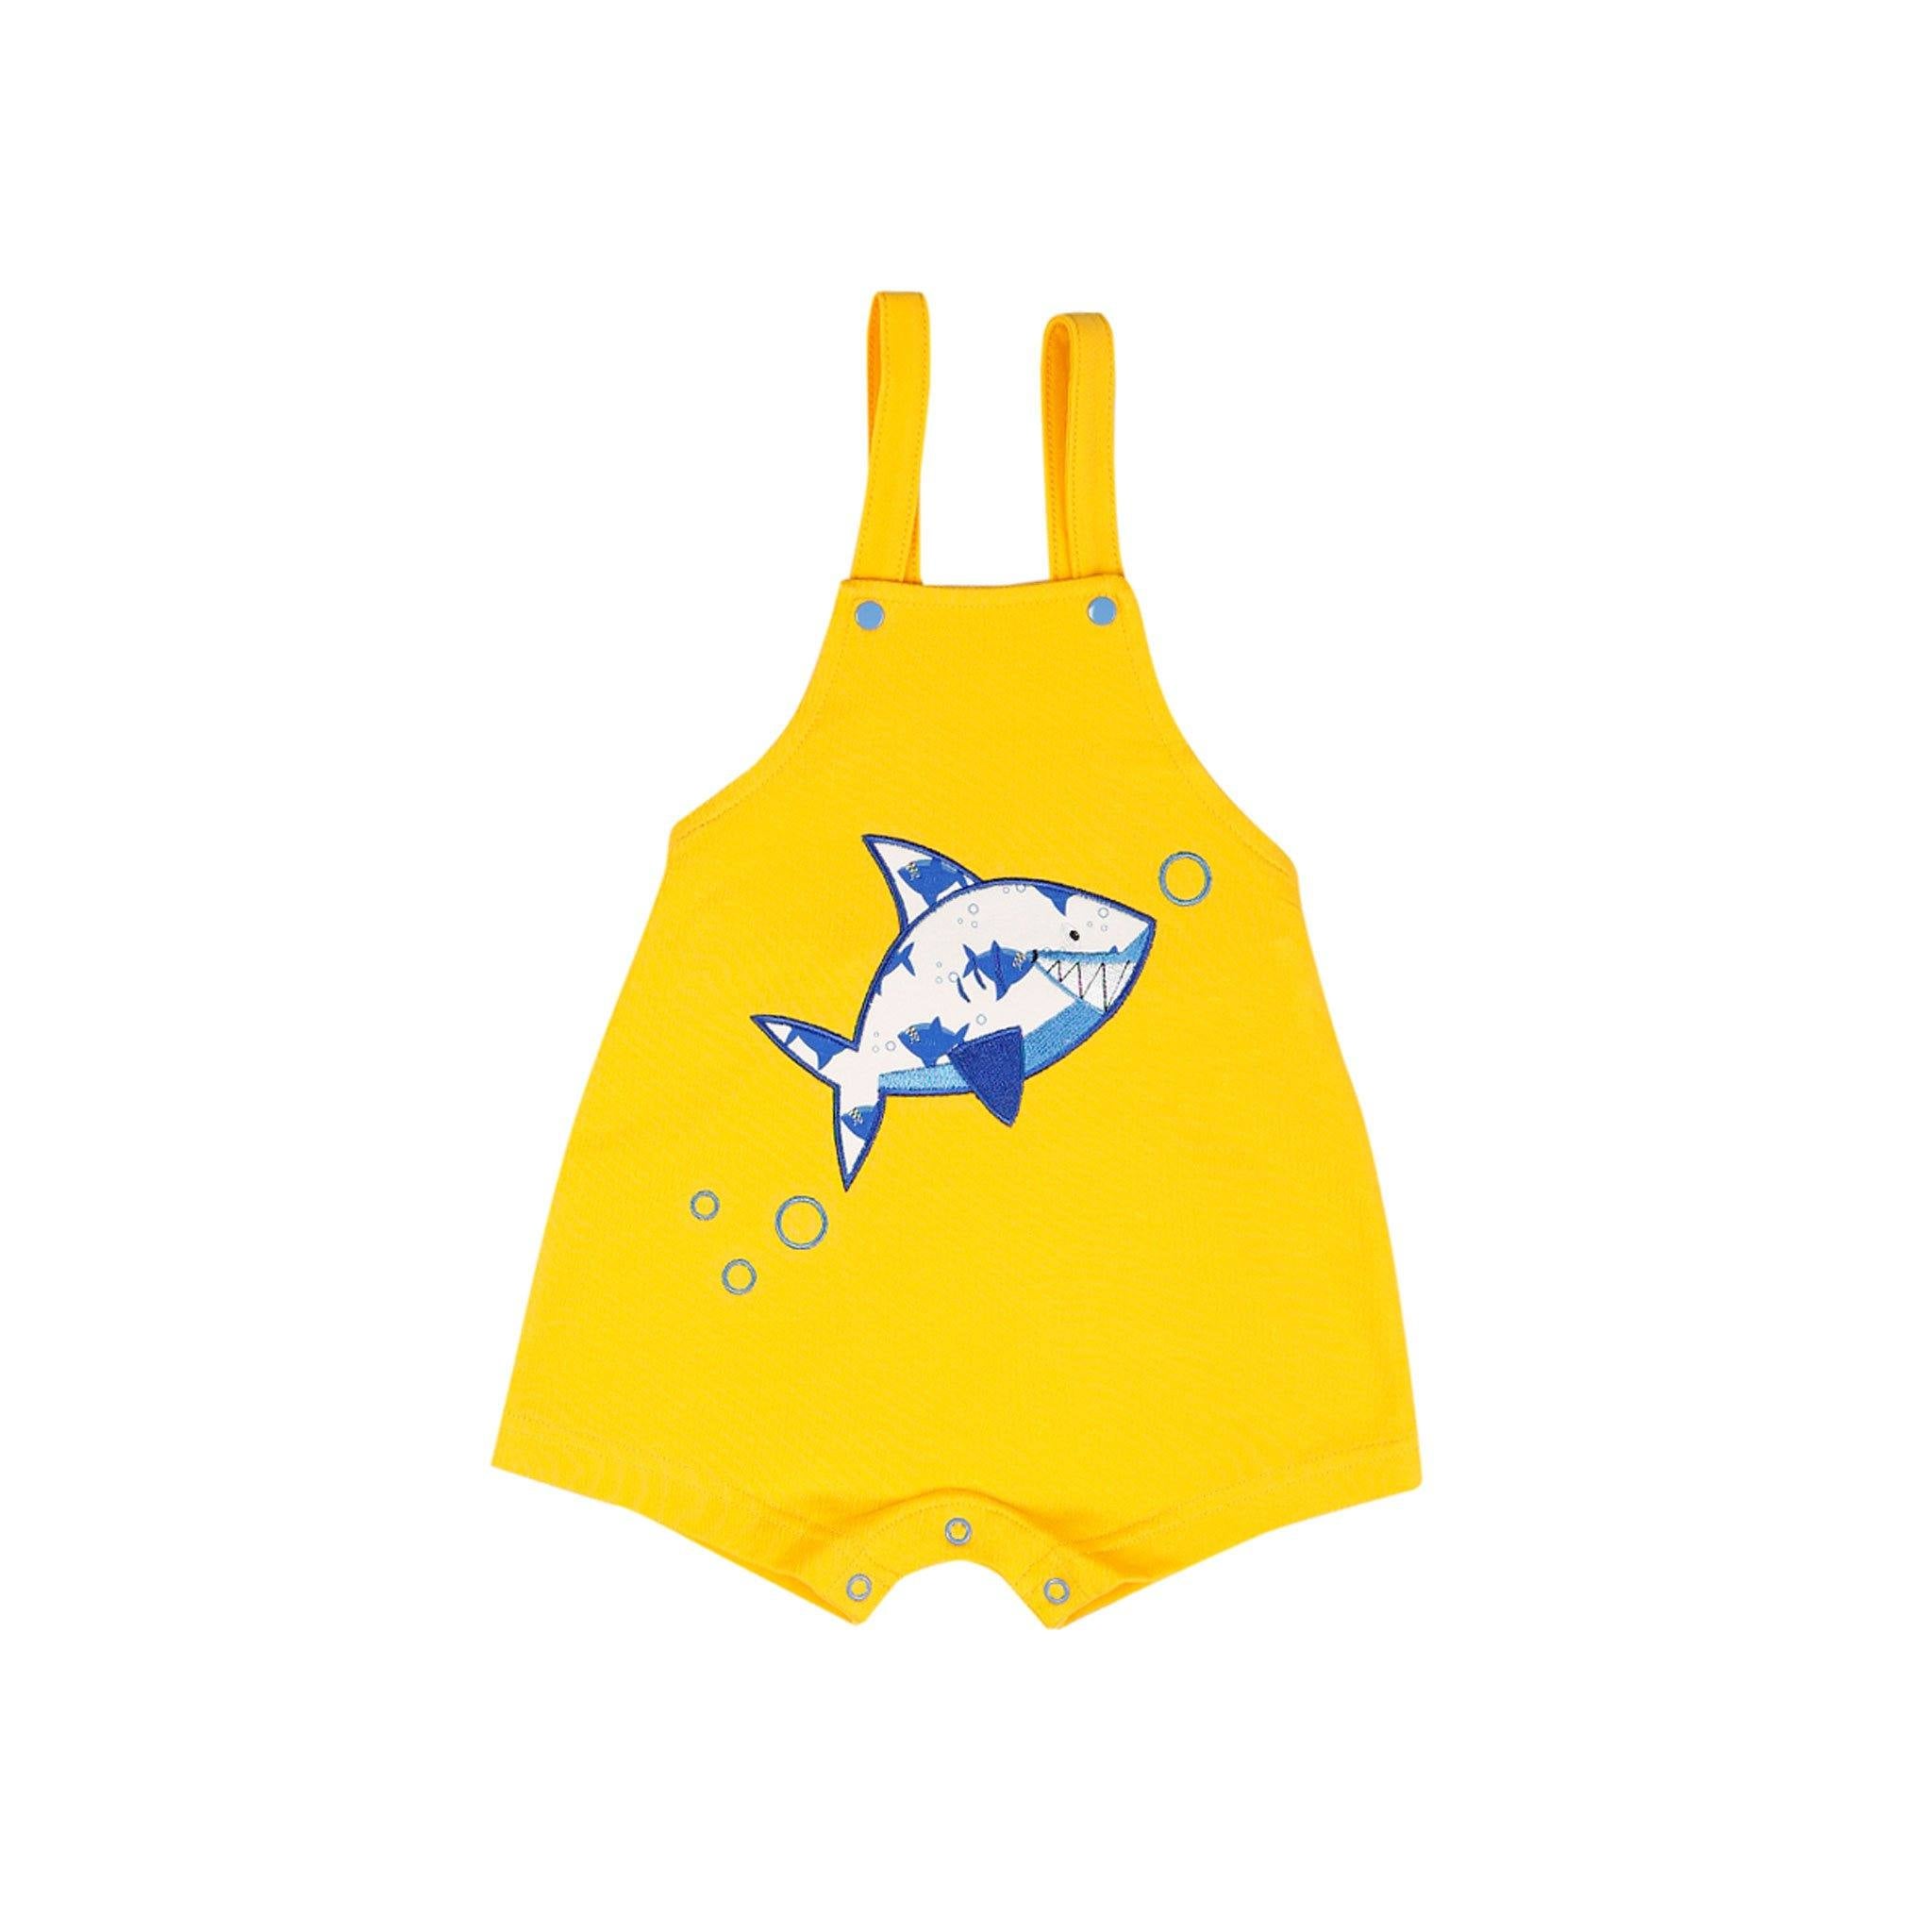 Shark in Yellow/Blue Organic Baby Boy Short Romper - Shark in Yellow/Blue Organic Baby Boy Short Romper - 3-6 Months / Blue - NilaKids - Melymod